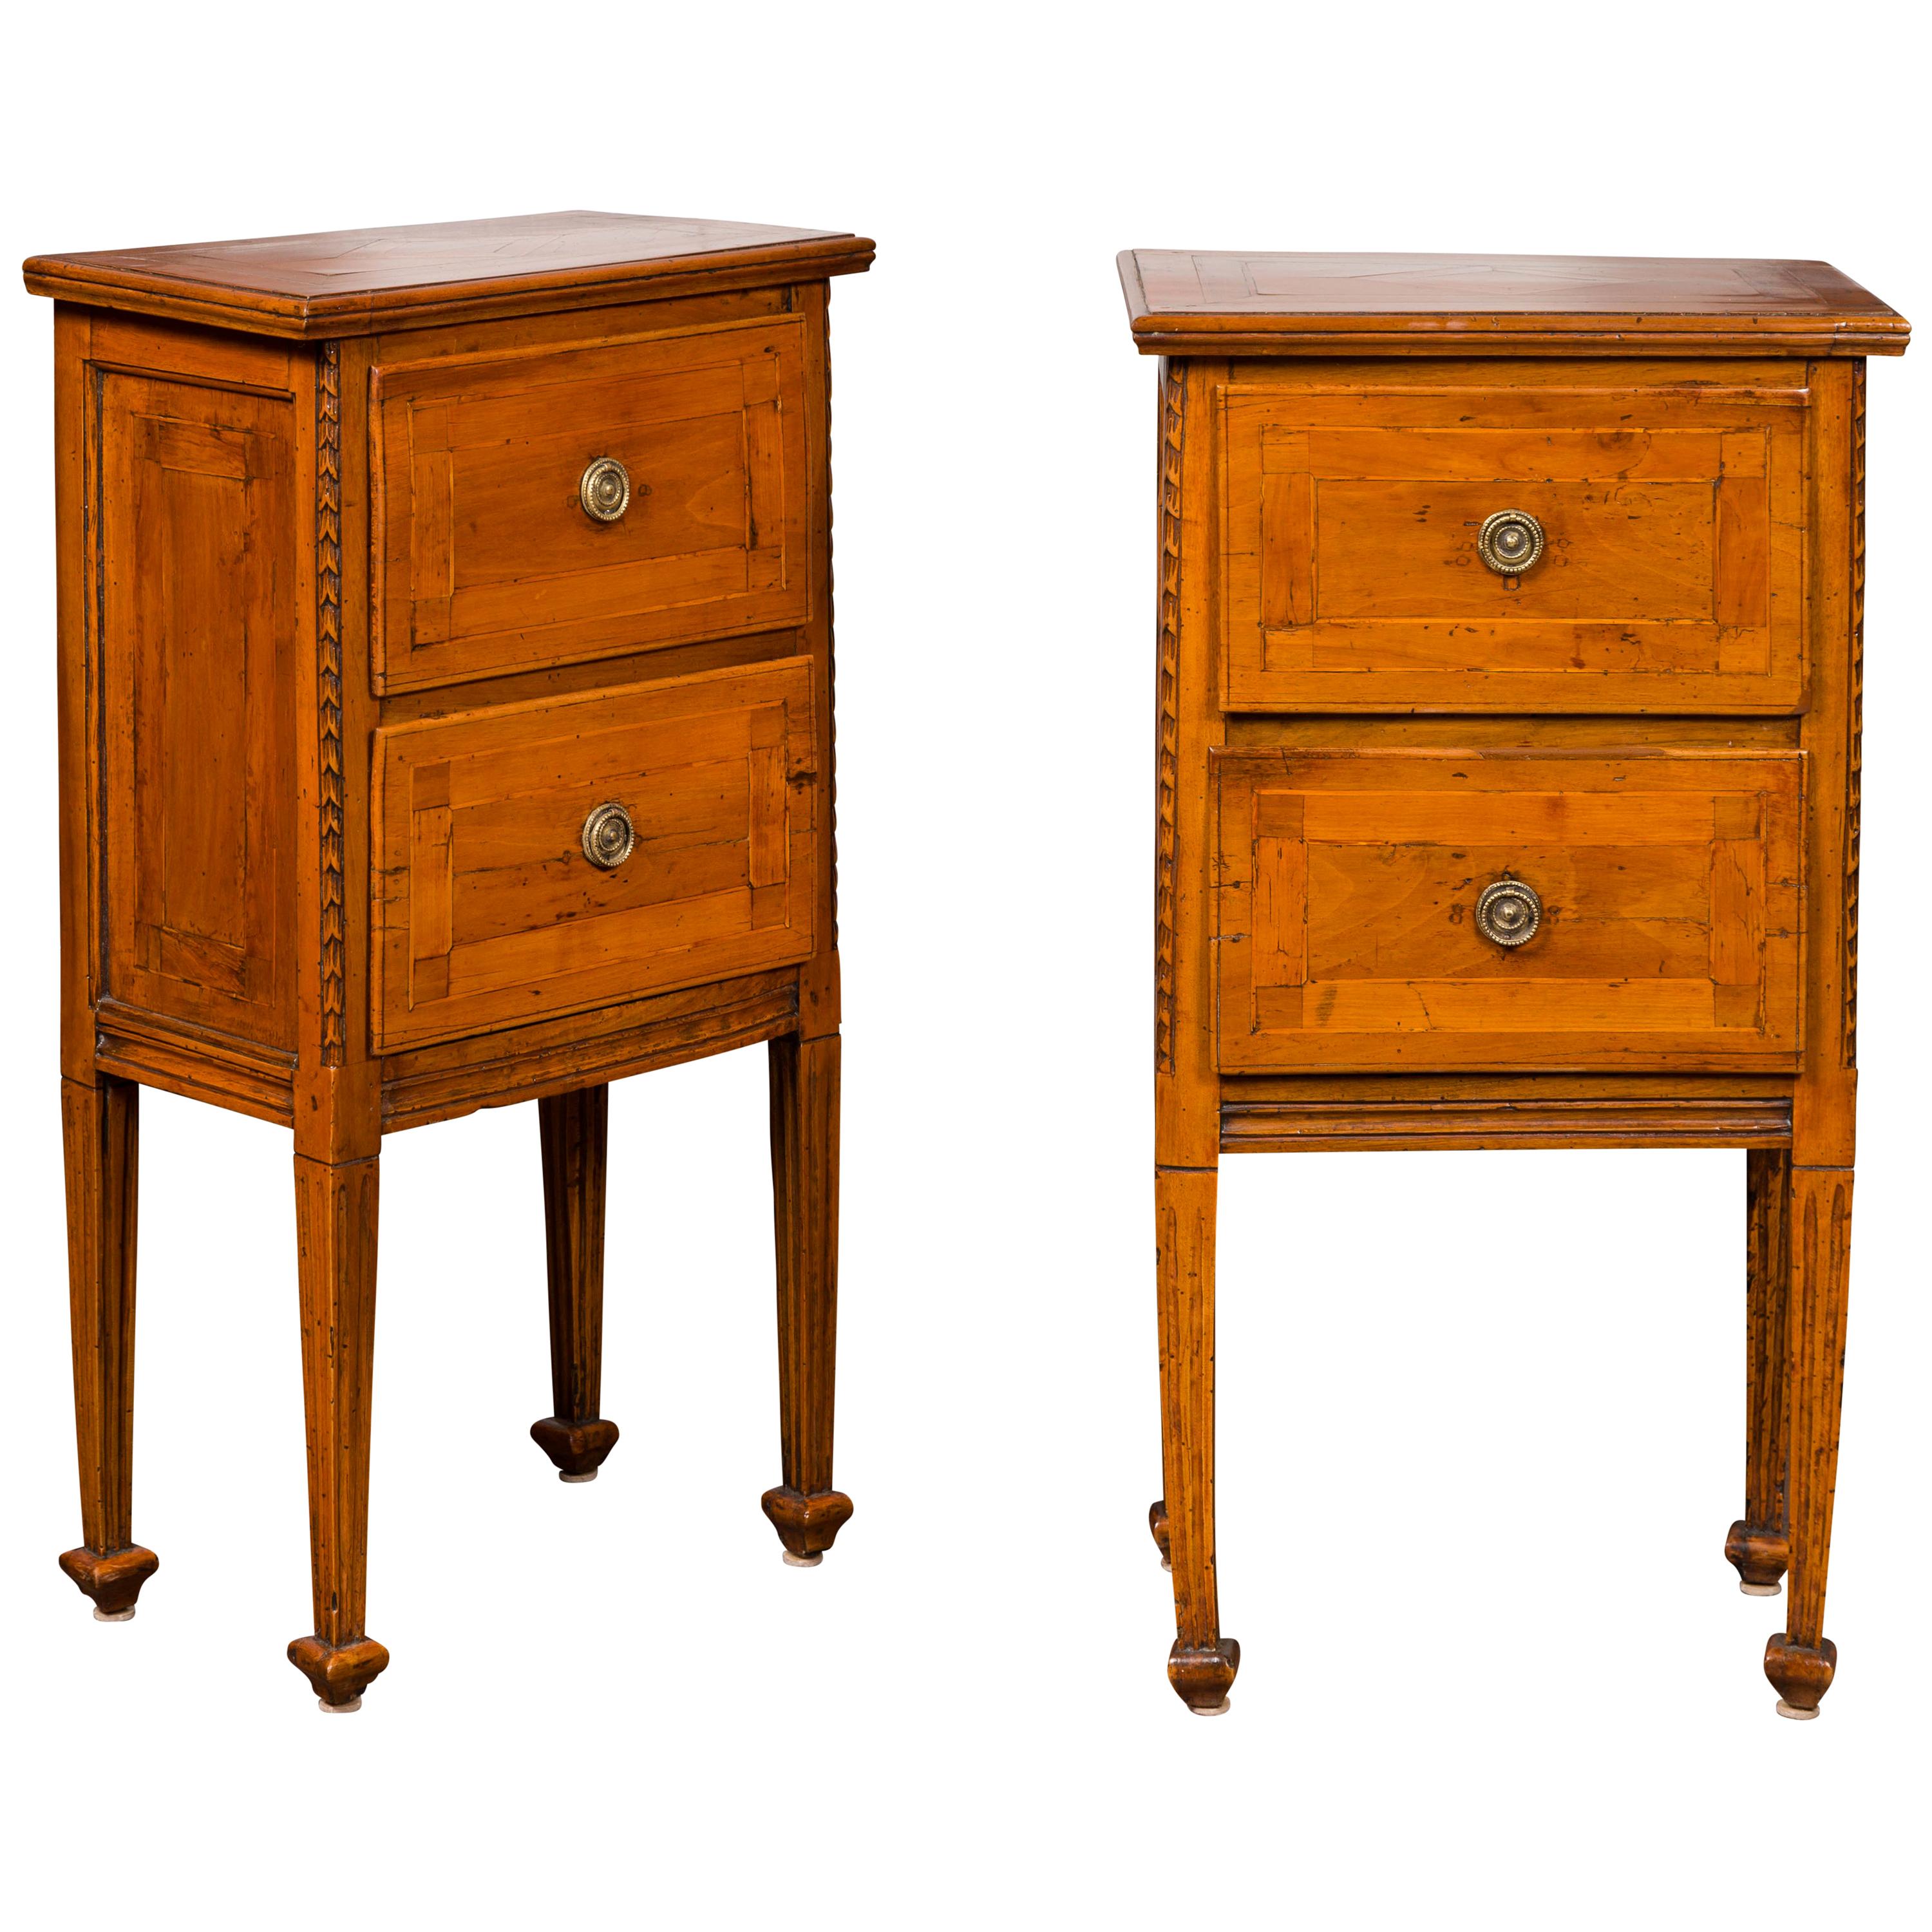 Pair of 1820s Italian Neoclassical Carved Walnut Bedside Tables with Banding